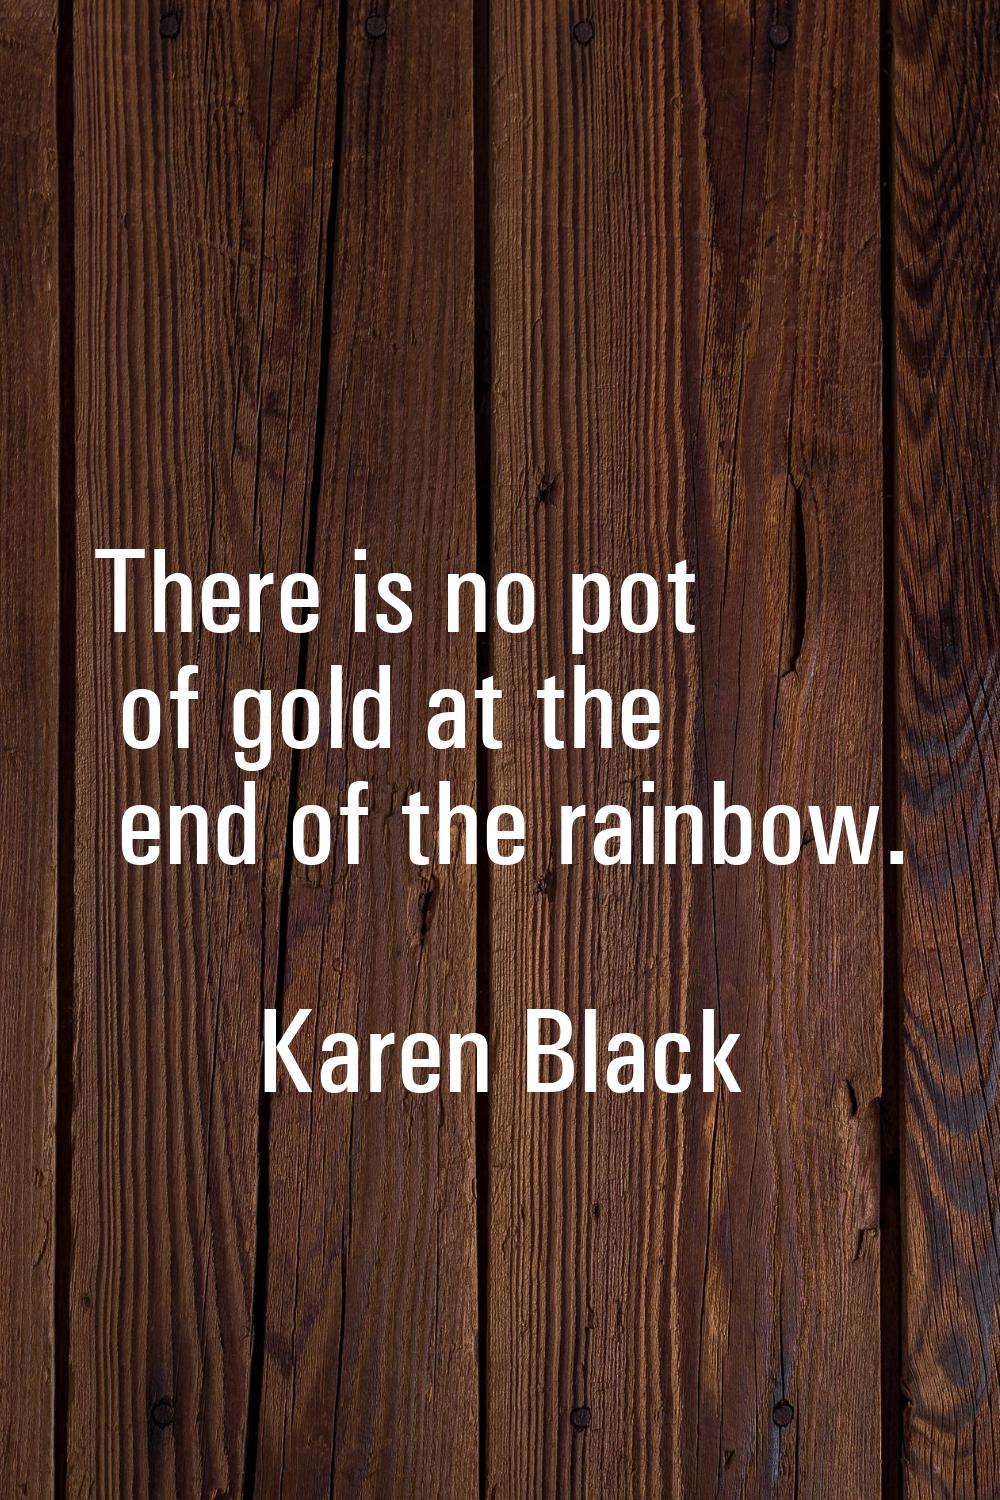 There is no pot of gold at the end of the rainbow.